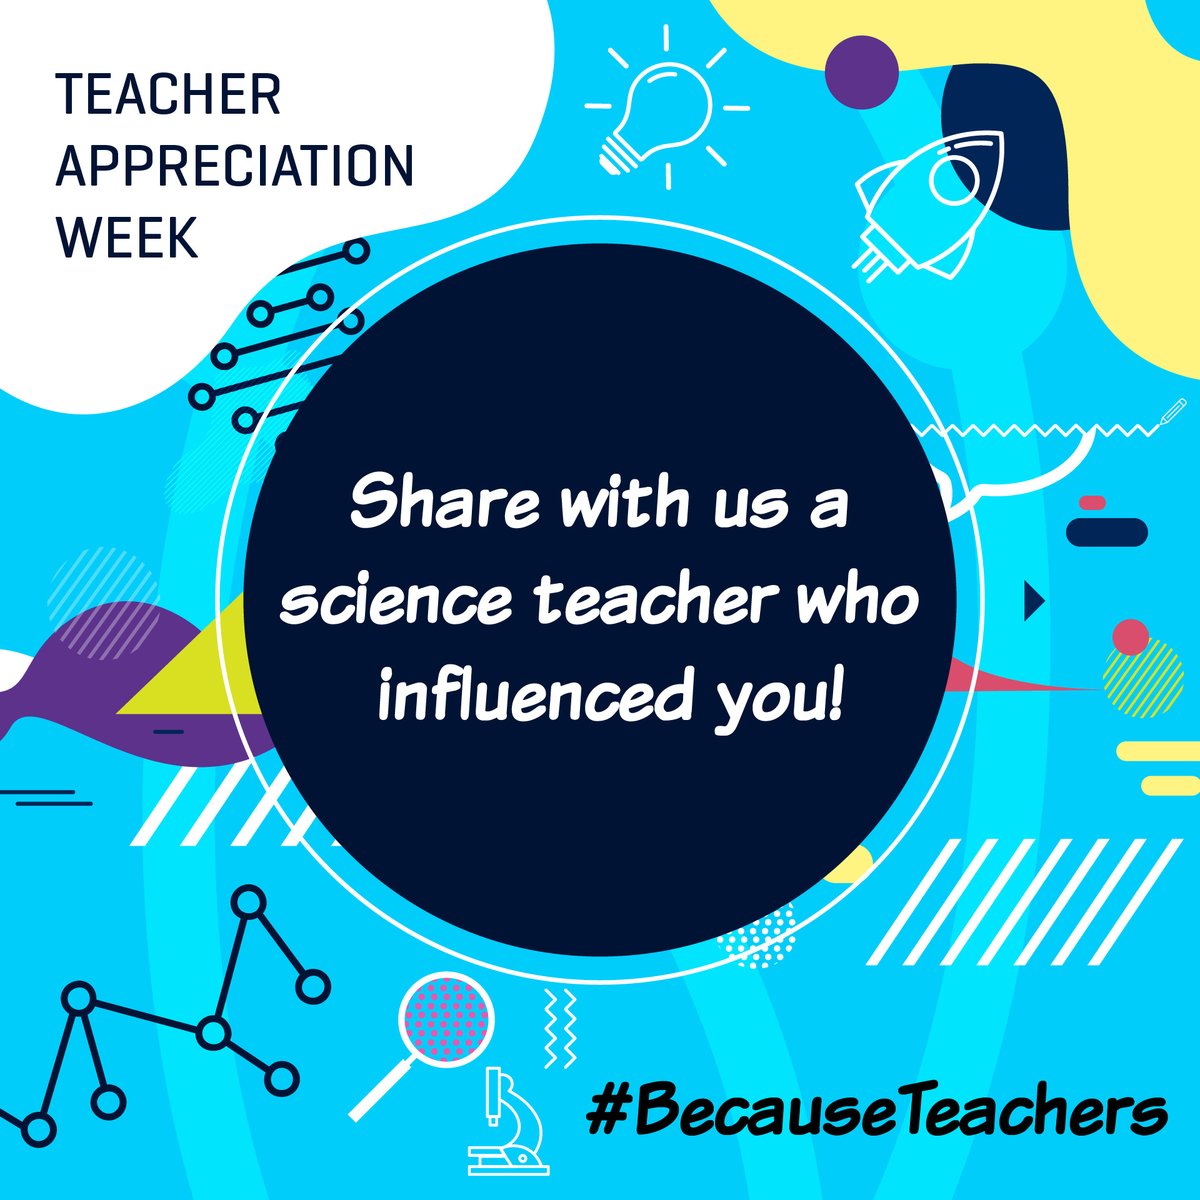 Science teachers have sparked a love for discovery and understanding the world around us in countless ways. Share with us a science teacher who influenced you to explore something new or connected with you in a special way! #BecauseTeachers #NSTA #TeacherAppreciationWeek